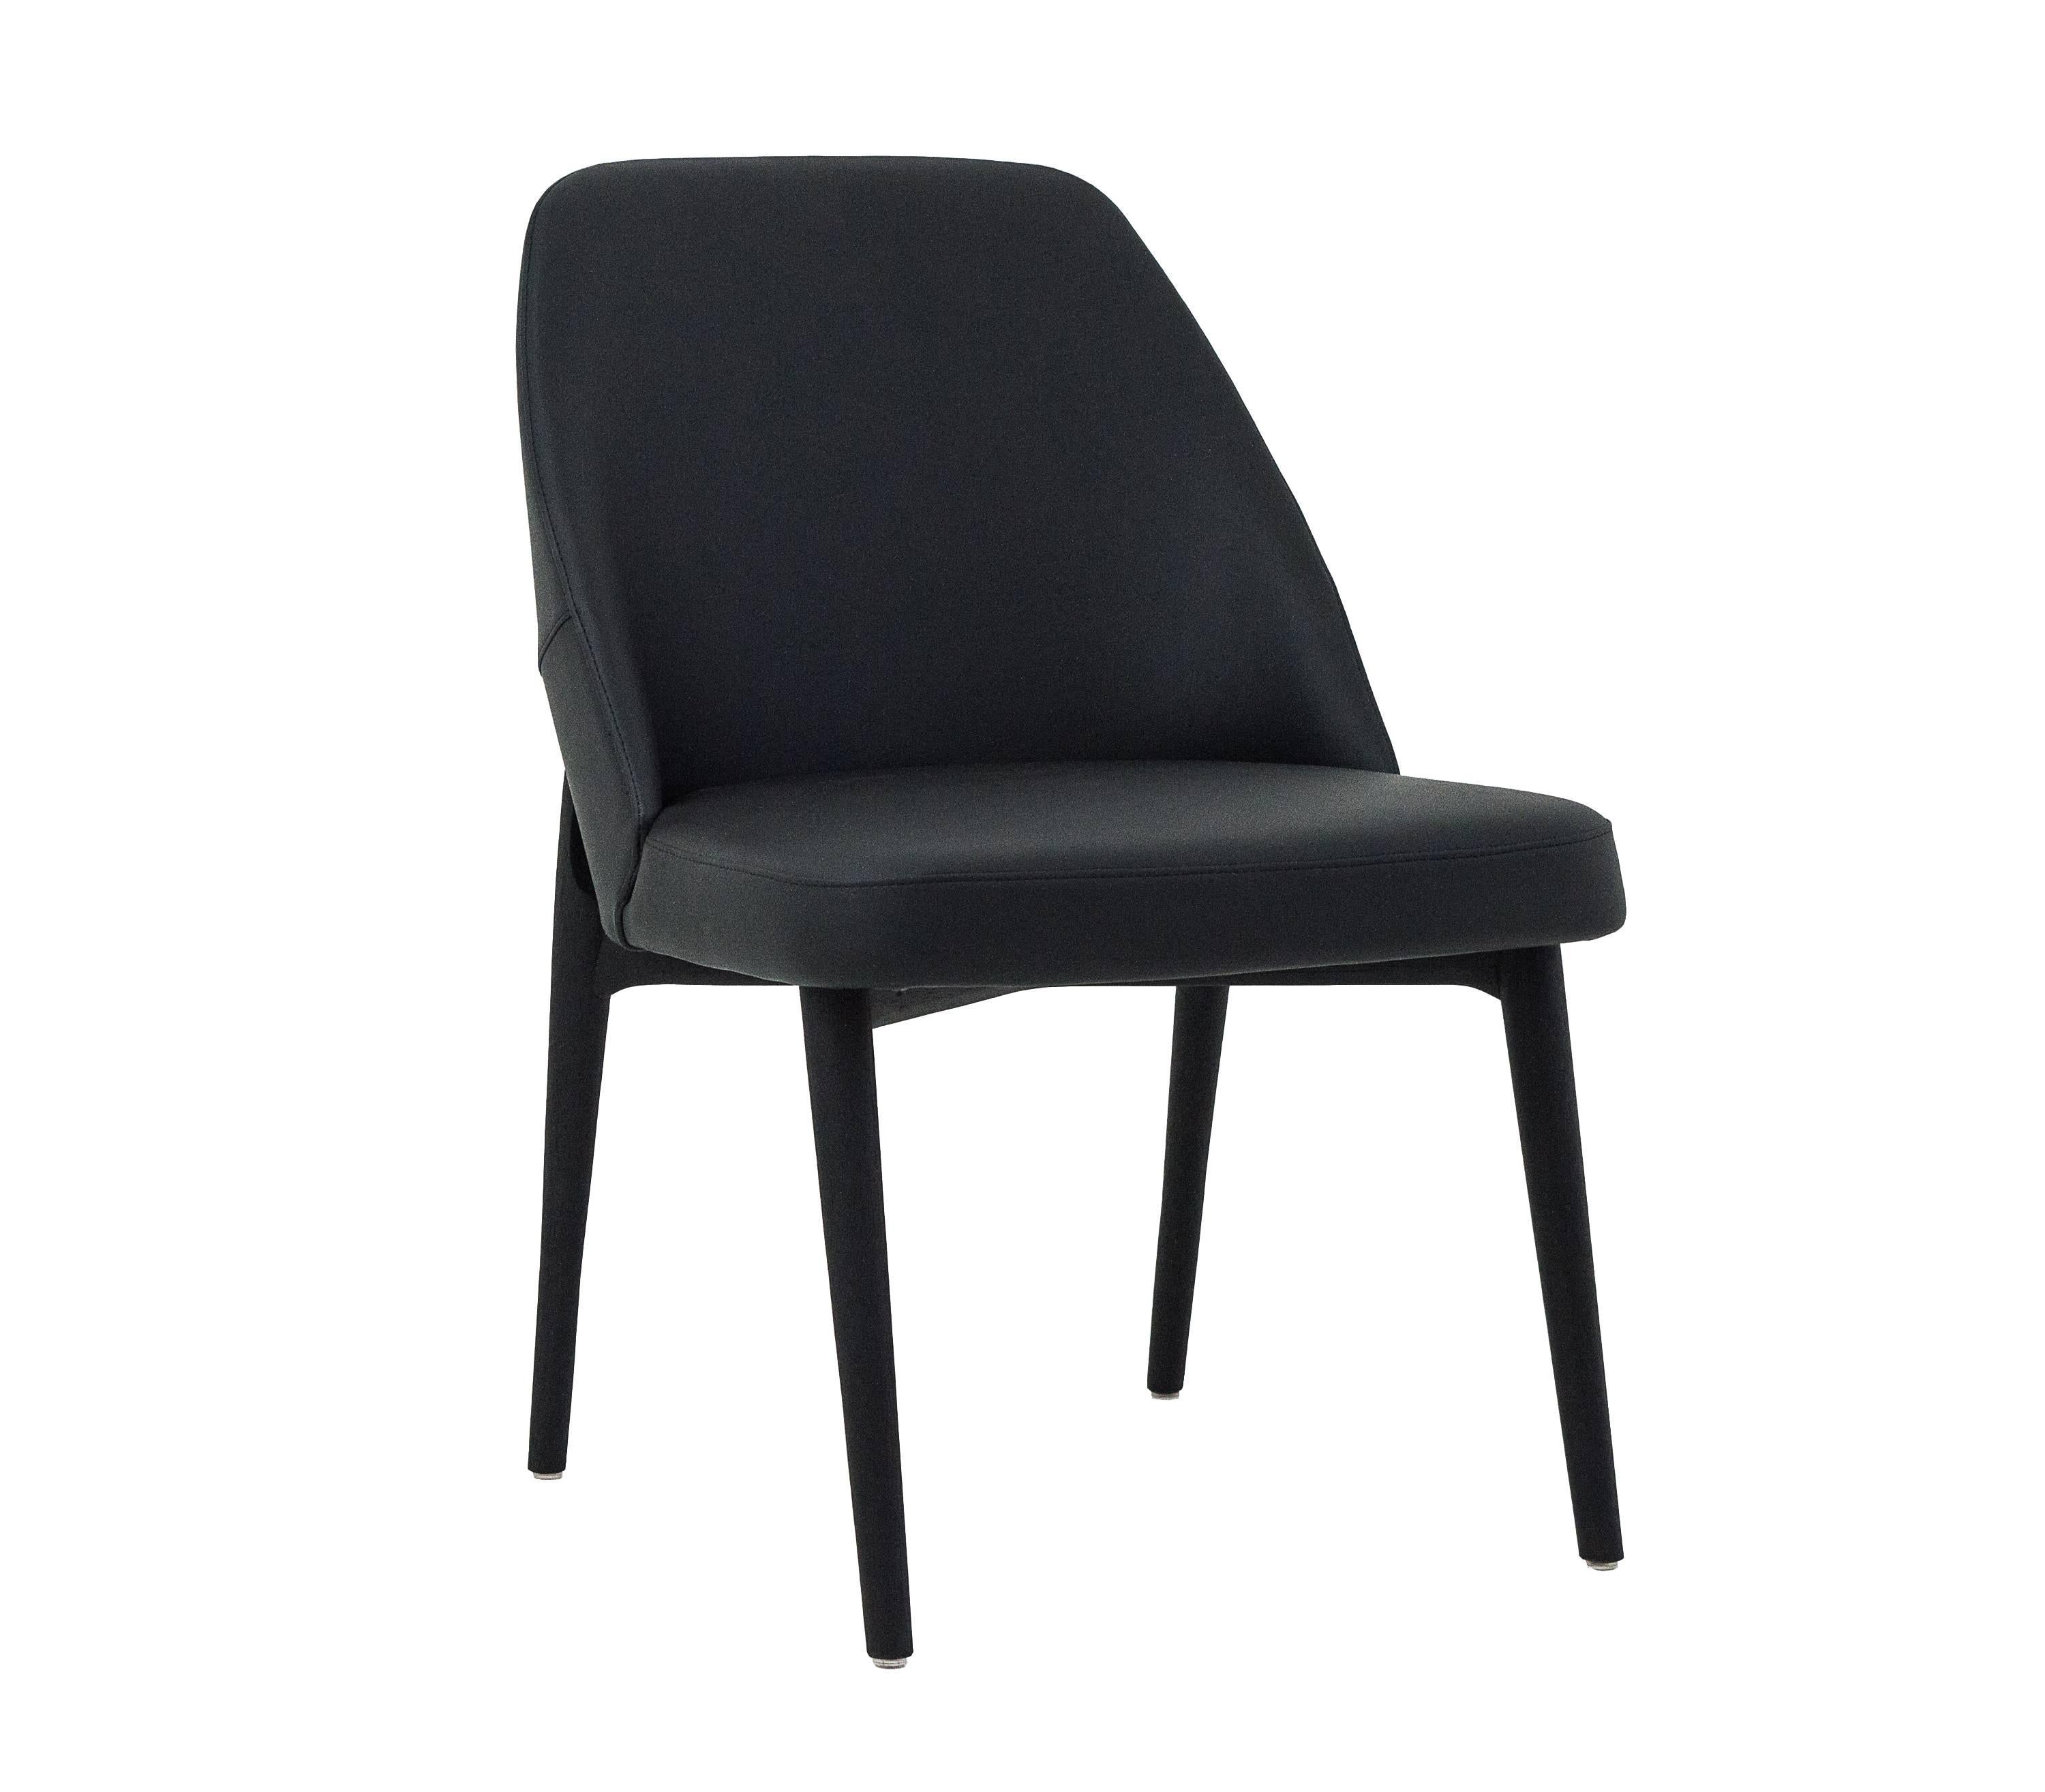 Contemporary Upholstered Black or Gray Fabric, Dining Chair Dandara For Sale